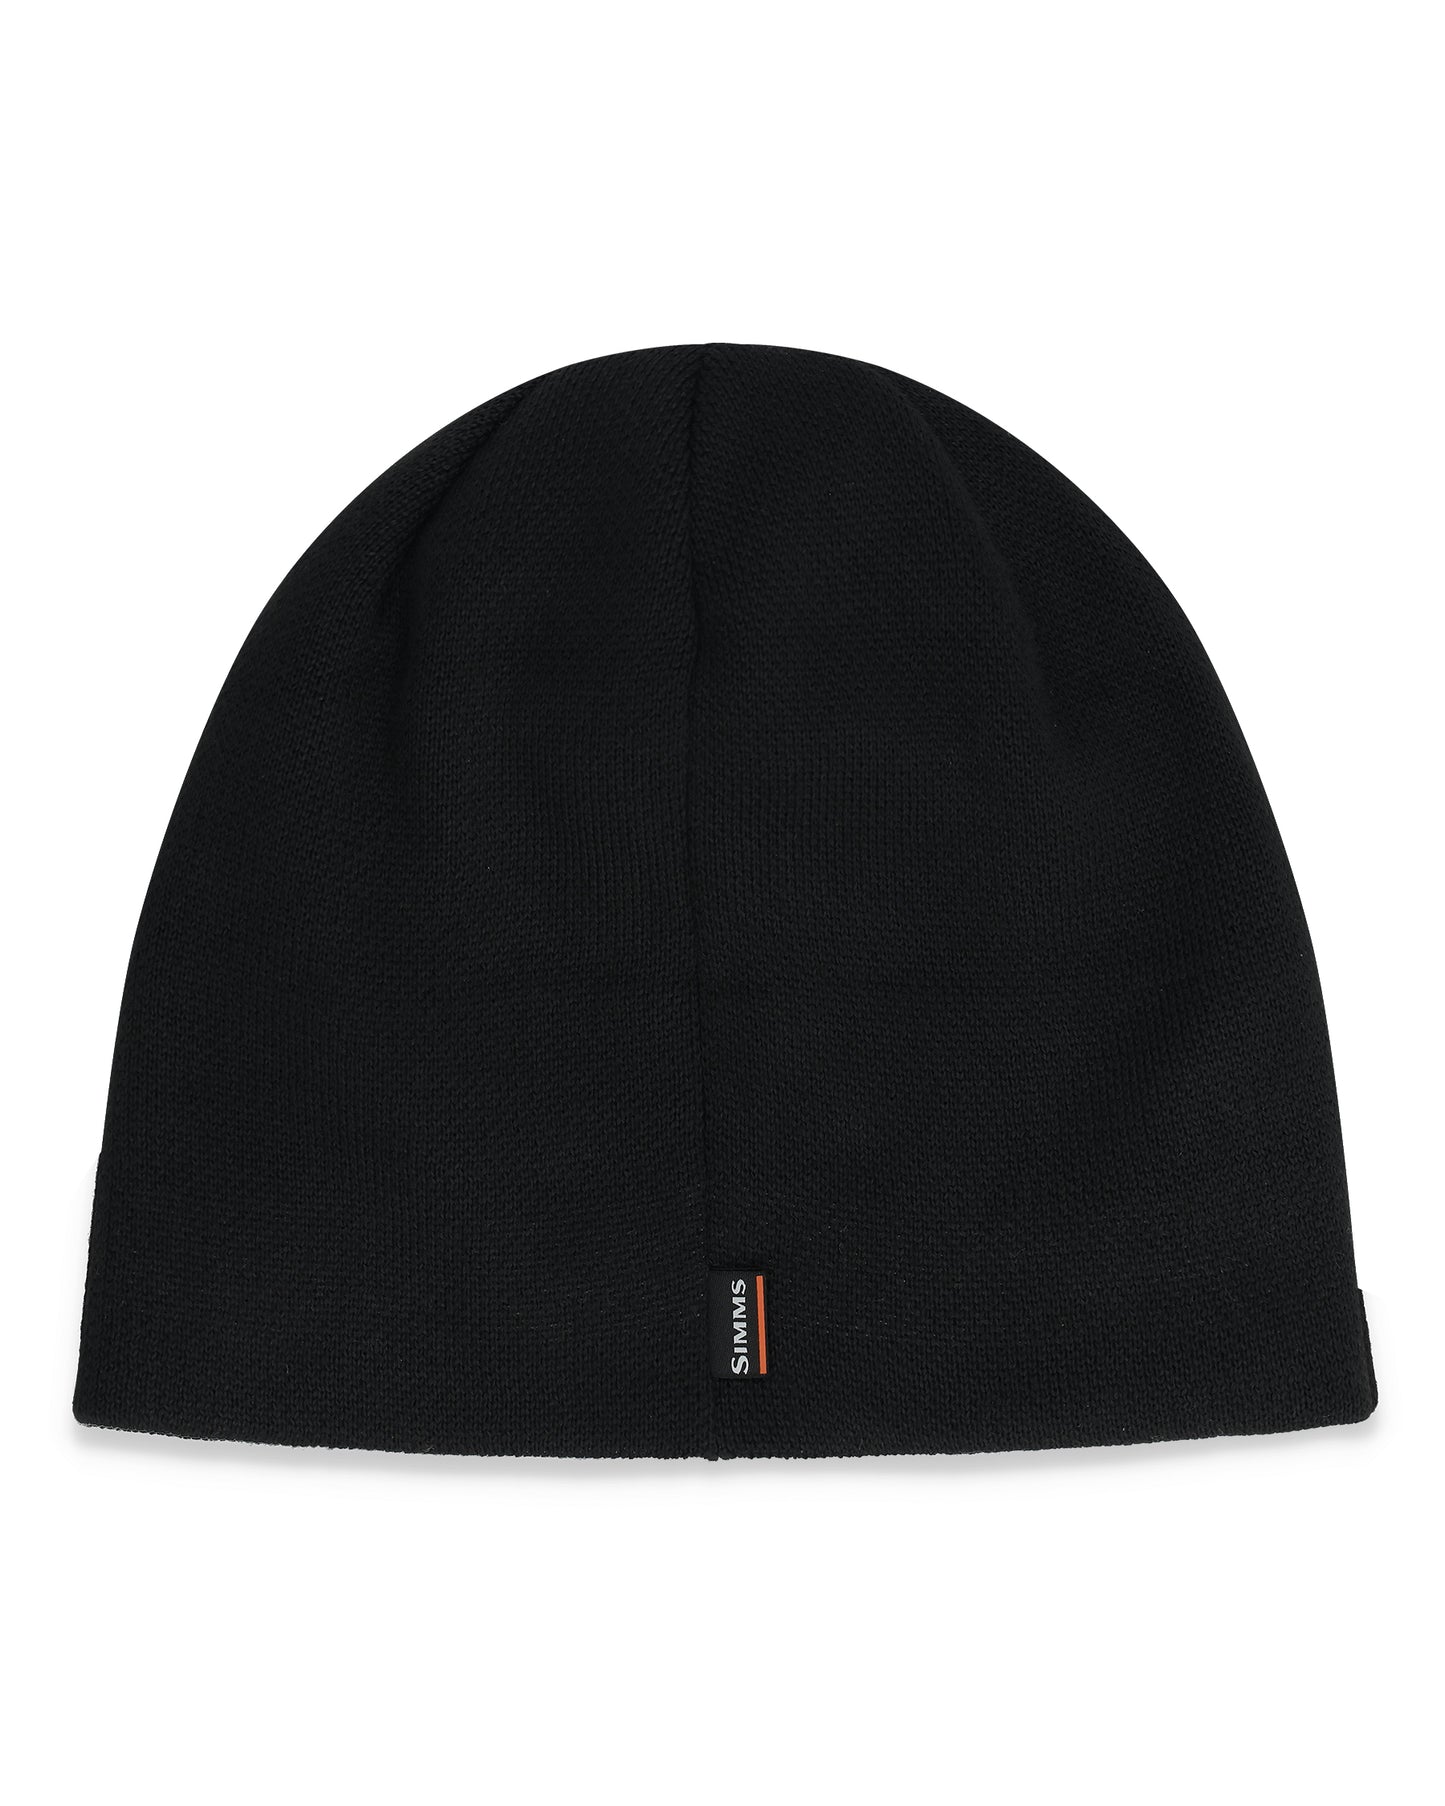         13091-001-Everyday-Beanie-Tabletop-F23-back